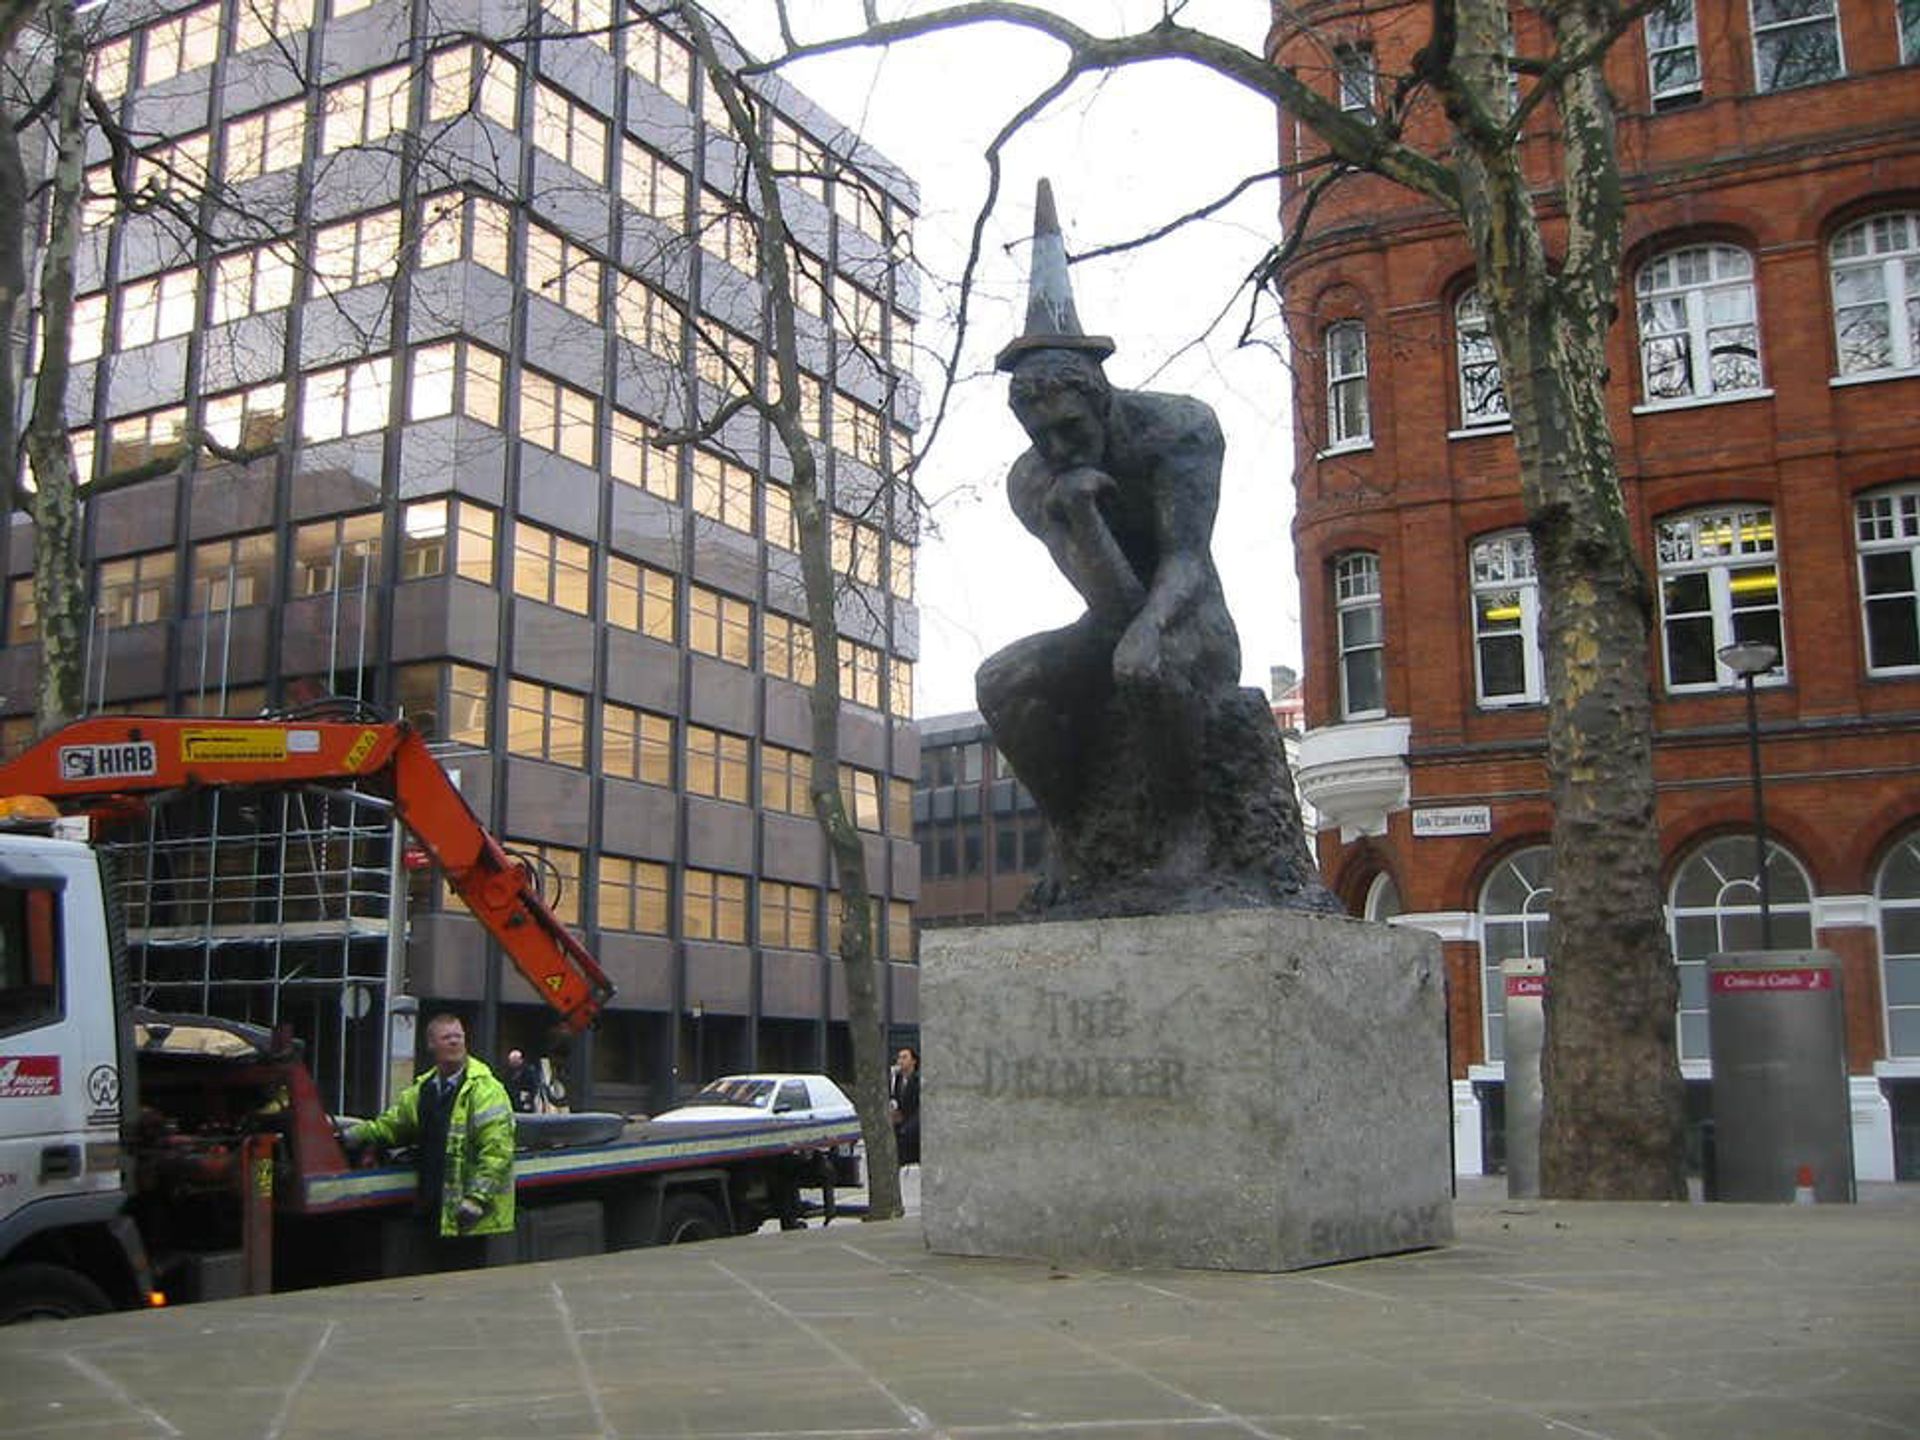 Banksy's The Drinker was "kidnapped" from his plinth in Soho in 2004 